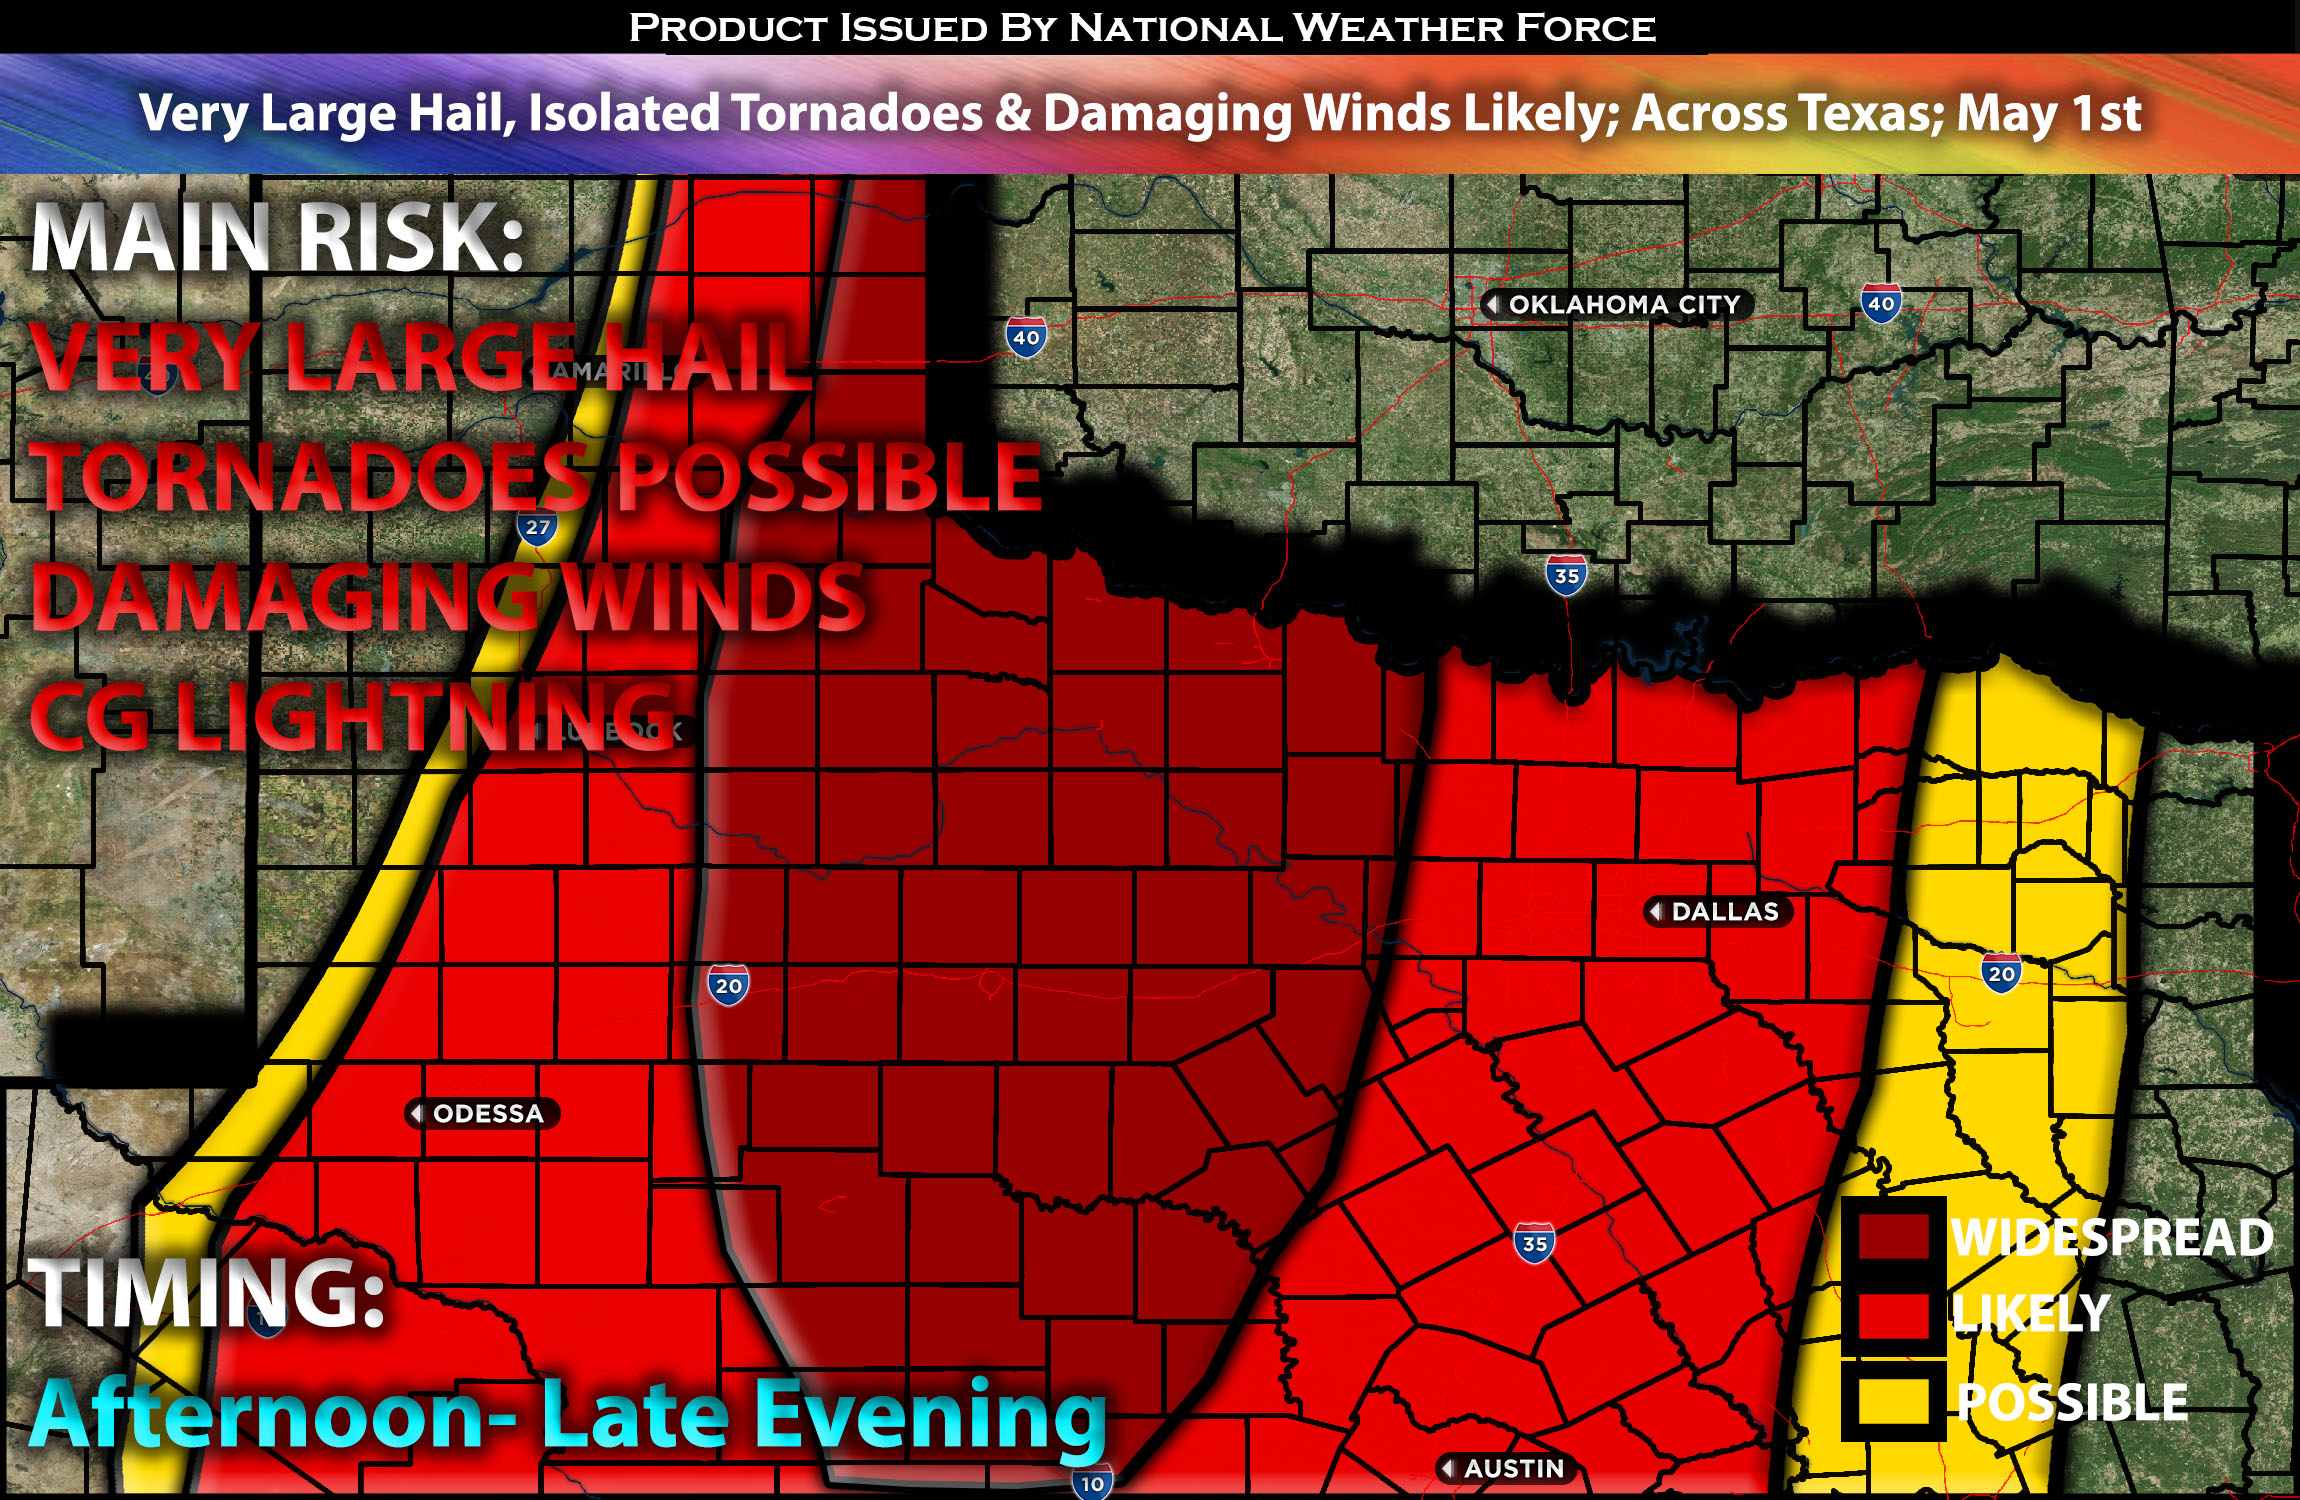 Very Large Hail, Isolated Tornadoes & Damaging Winds Likely; Across Texas; May 1st